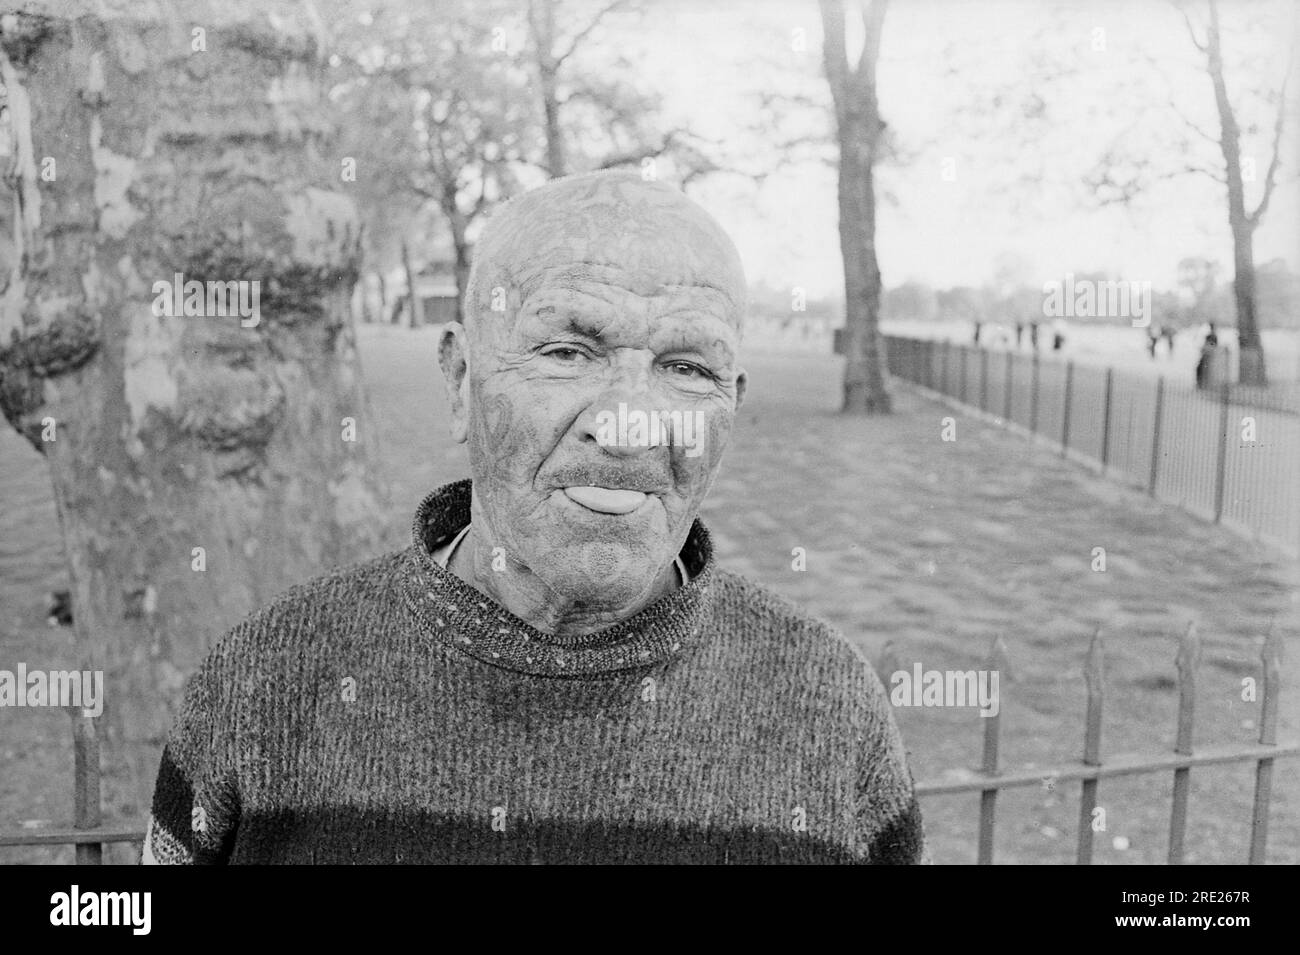 London. 1965 – The enigmatic ‘Tattoo Man’, Jacobus Petrus Van Dyn (1896-1983) posing for a photograph at Speaker’s Corner, Hyde Park , whilst poking his tongue out. Official records show that Van Dyn was born in Cradock, South Africa, had enlisted into the British army during the First World War and was later employed as a merchant seaman.  He had a string of criminal convictions going back as far as 1908 and made regular appearances at Speaker’s Corner, where he would recall colourful accounts of his life, claiming that he had once worked as a driver for the American gangster Al Capone. Stock Photo